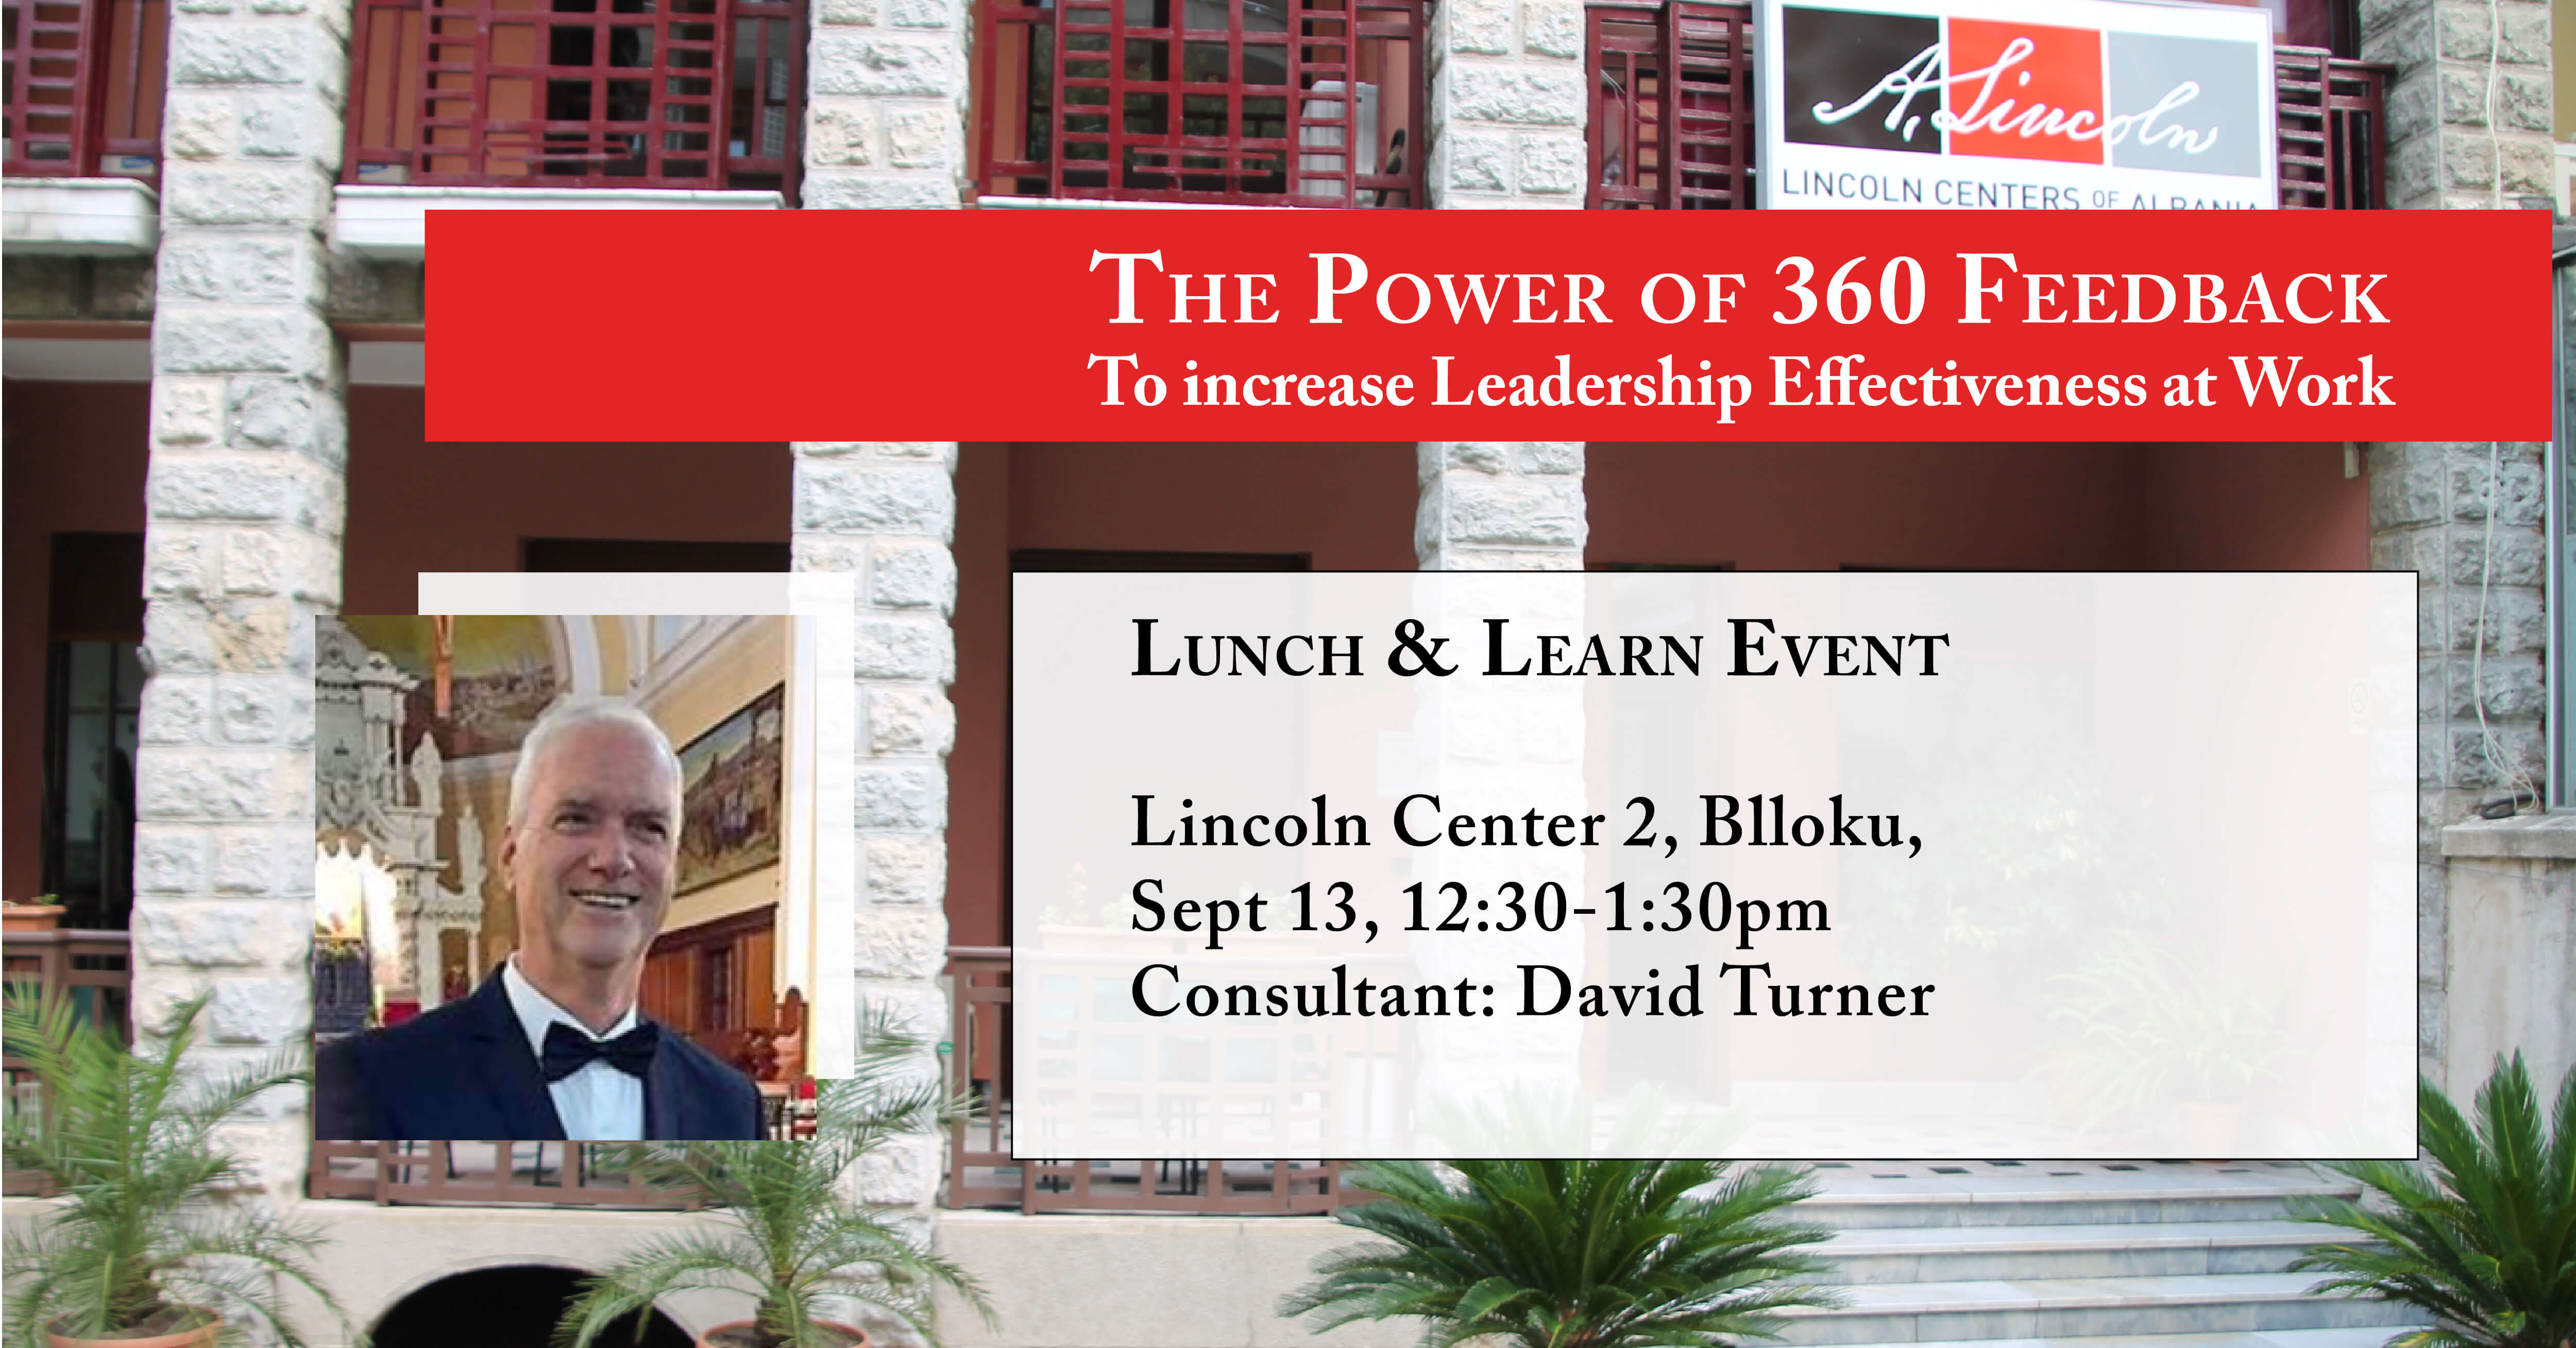 The Power of 360 Feedback To increase Leadership Effectiveness at Work